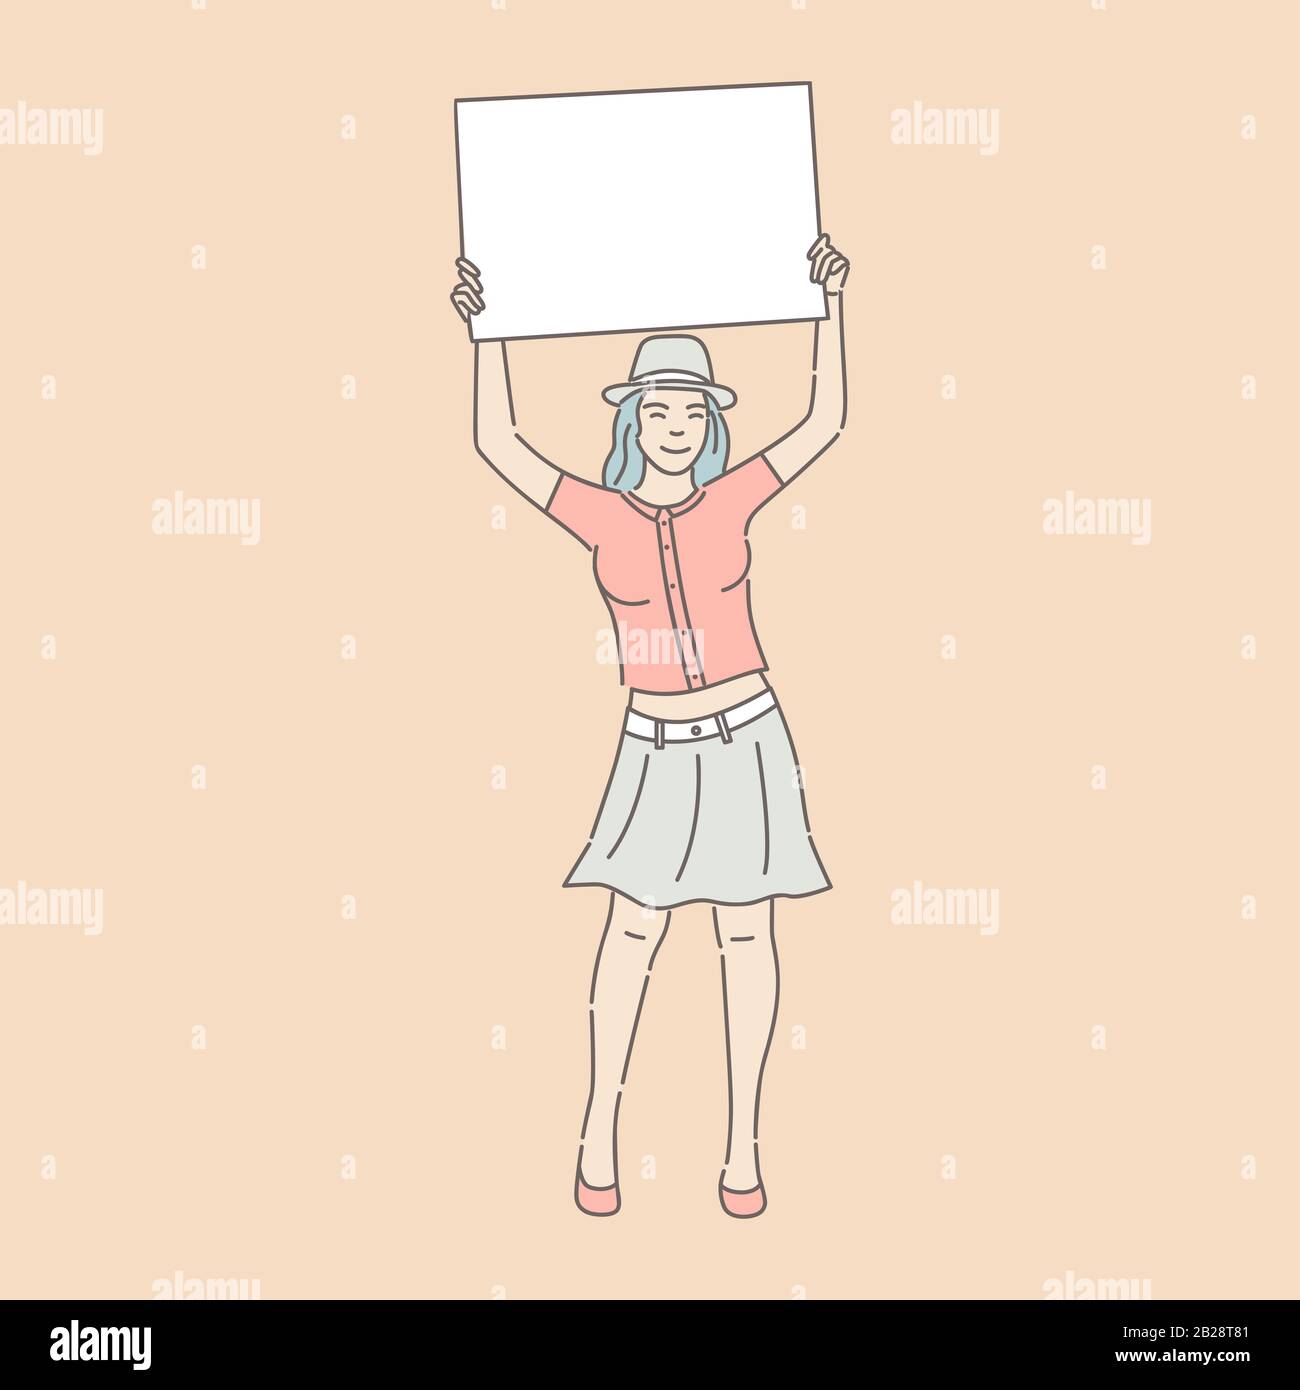 Smiling young girl in casual clothes holding card in raising hands vector illustration. Female cartoon outline character. Demonstration, activism, advertising, protesting blank placard concept. Stock Vector